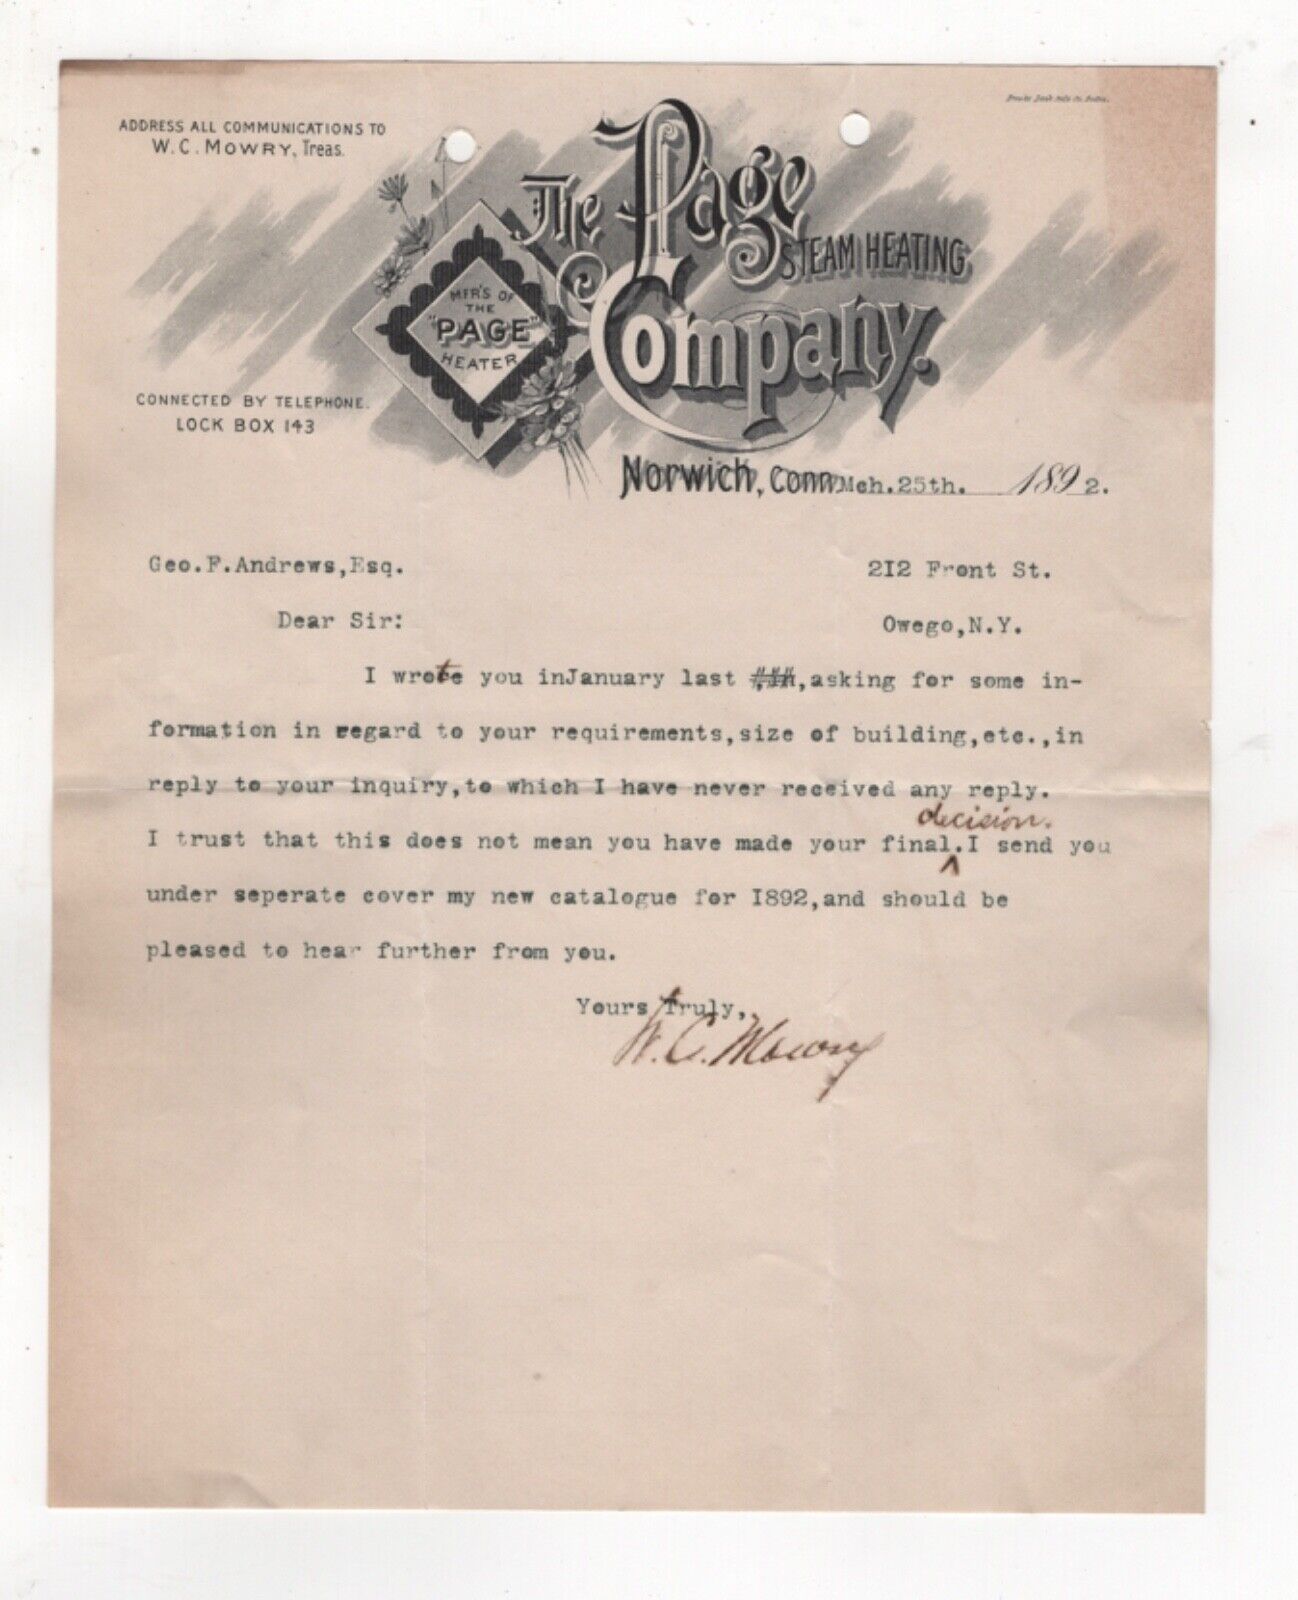 1892 PAGE STEAM HEATING COMPANY LETTERHEAD NORWICH CT WC MOWRY